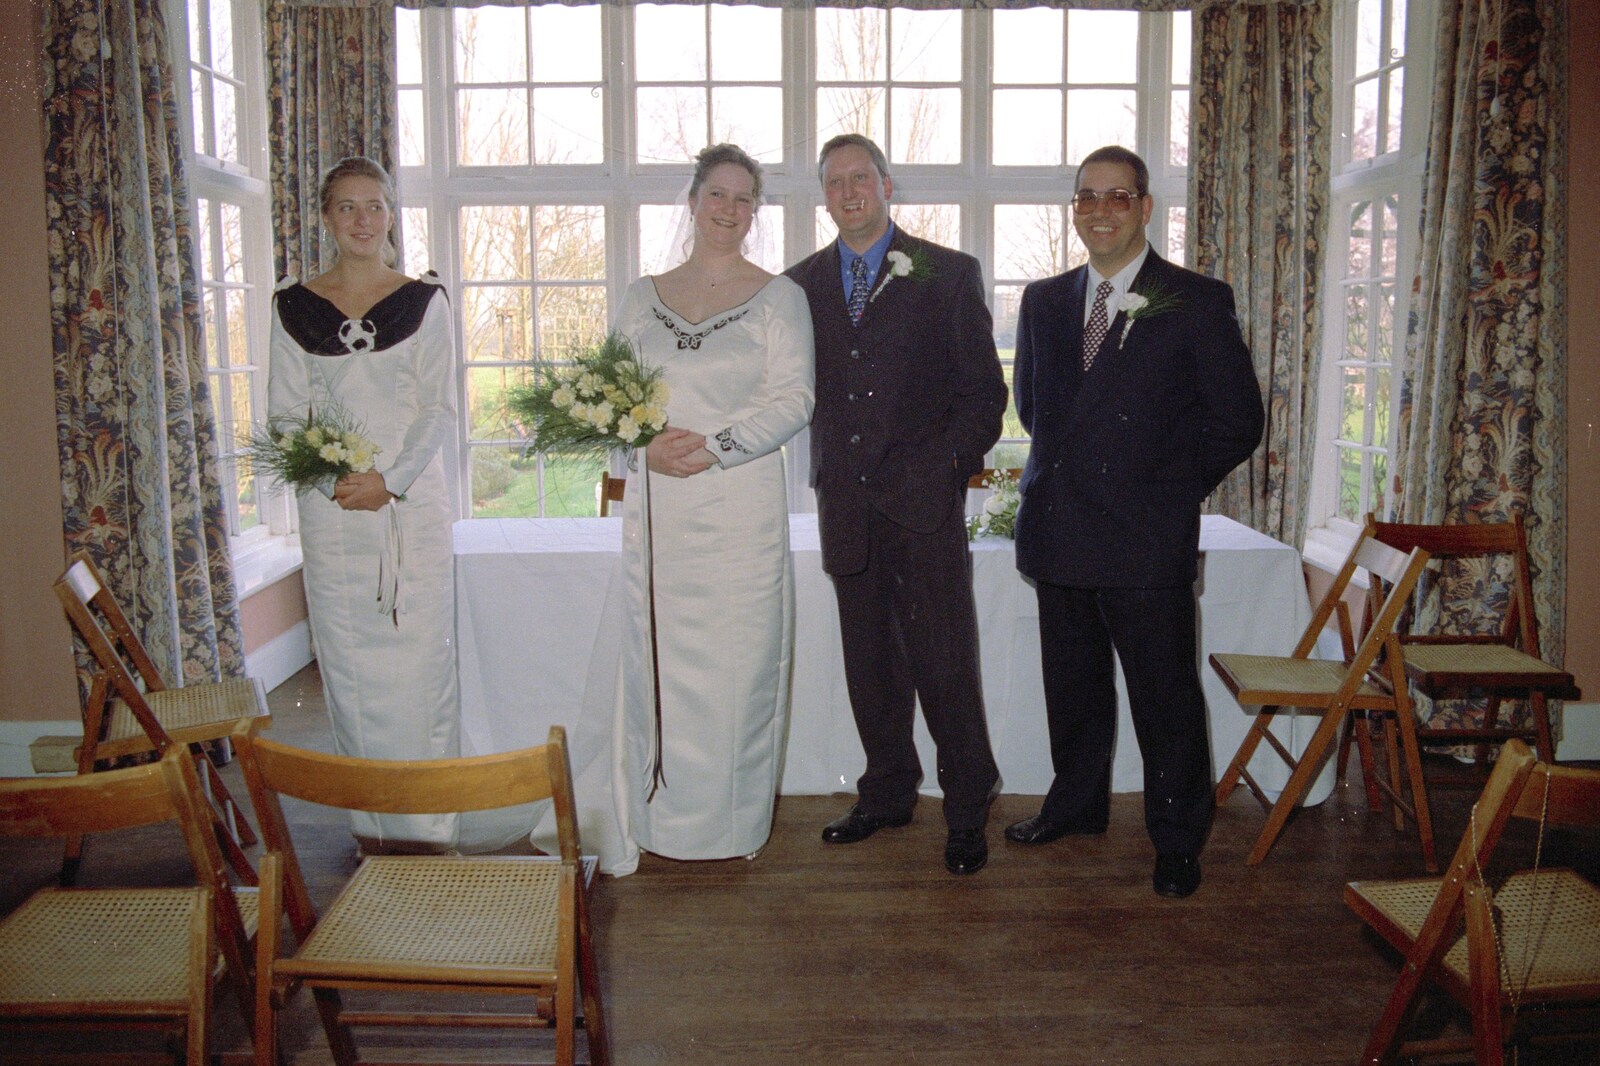 Helen, Pauline, Graham and Roger from The Brome Swan at Graham and Pauline's Wedding, Gissing Hall, Norfolk - 28th April 1997